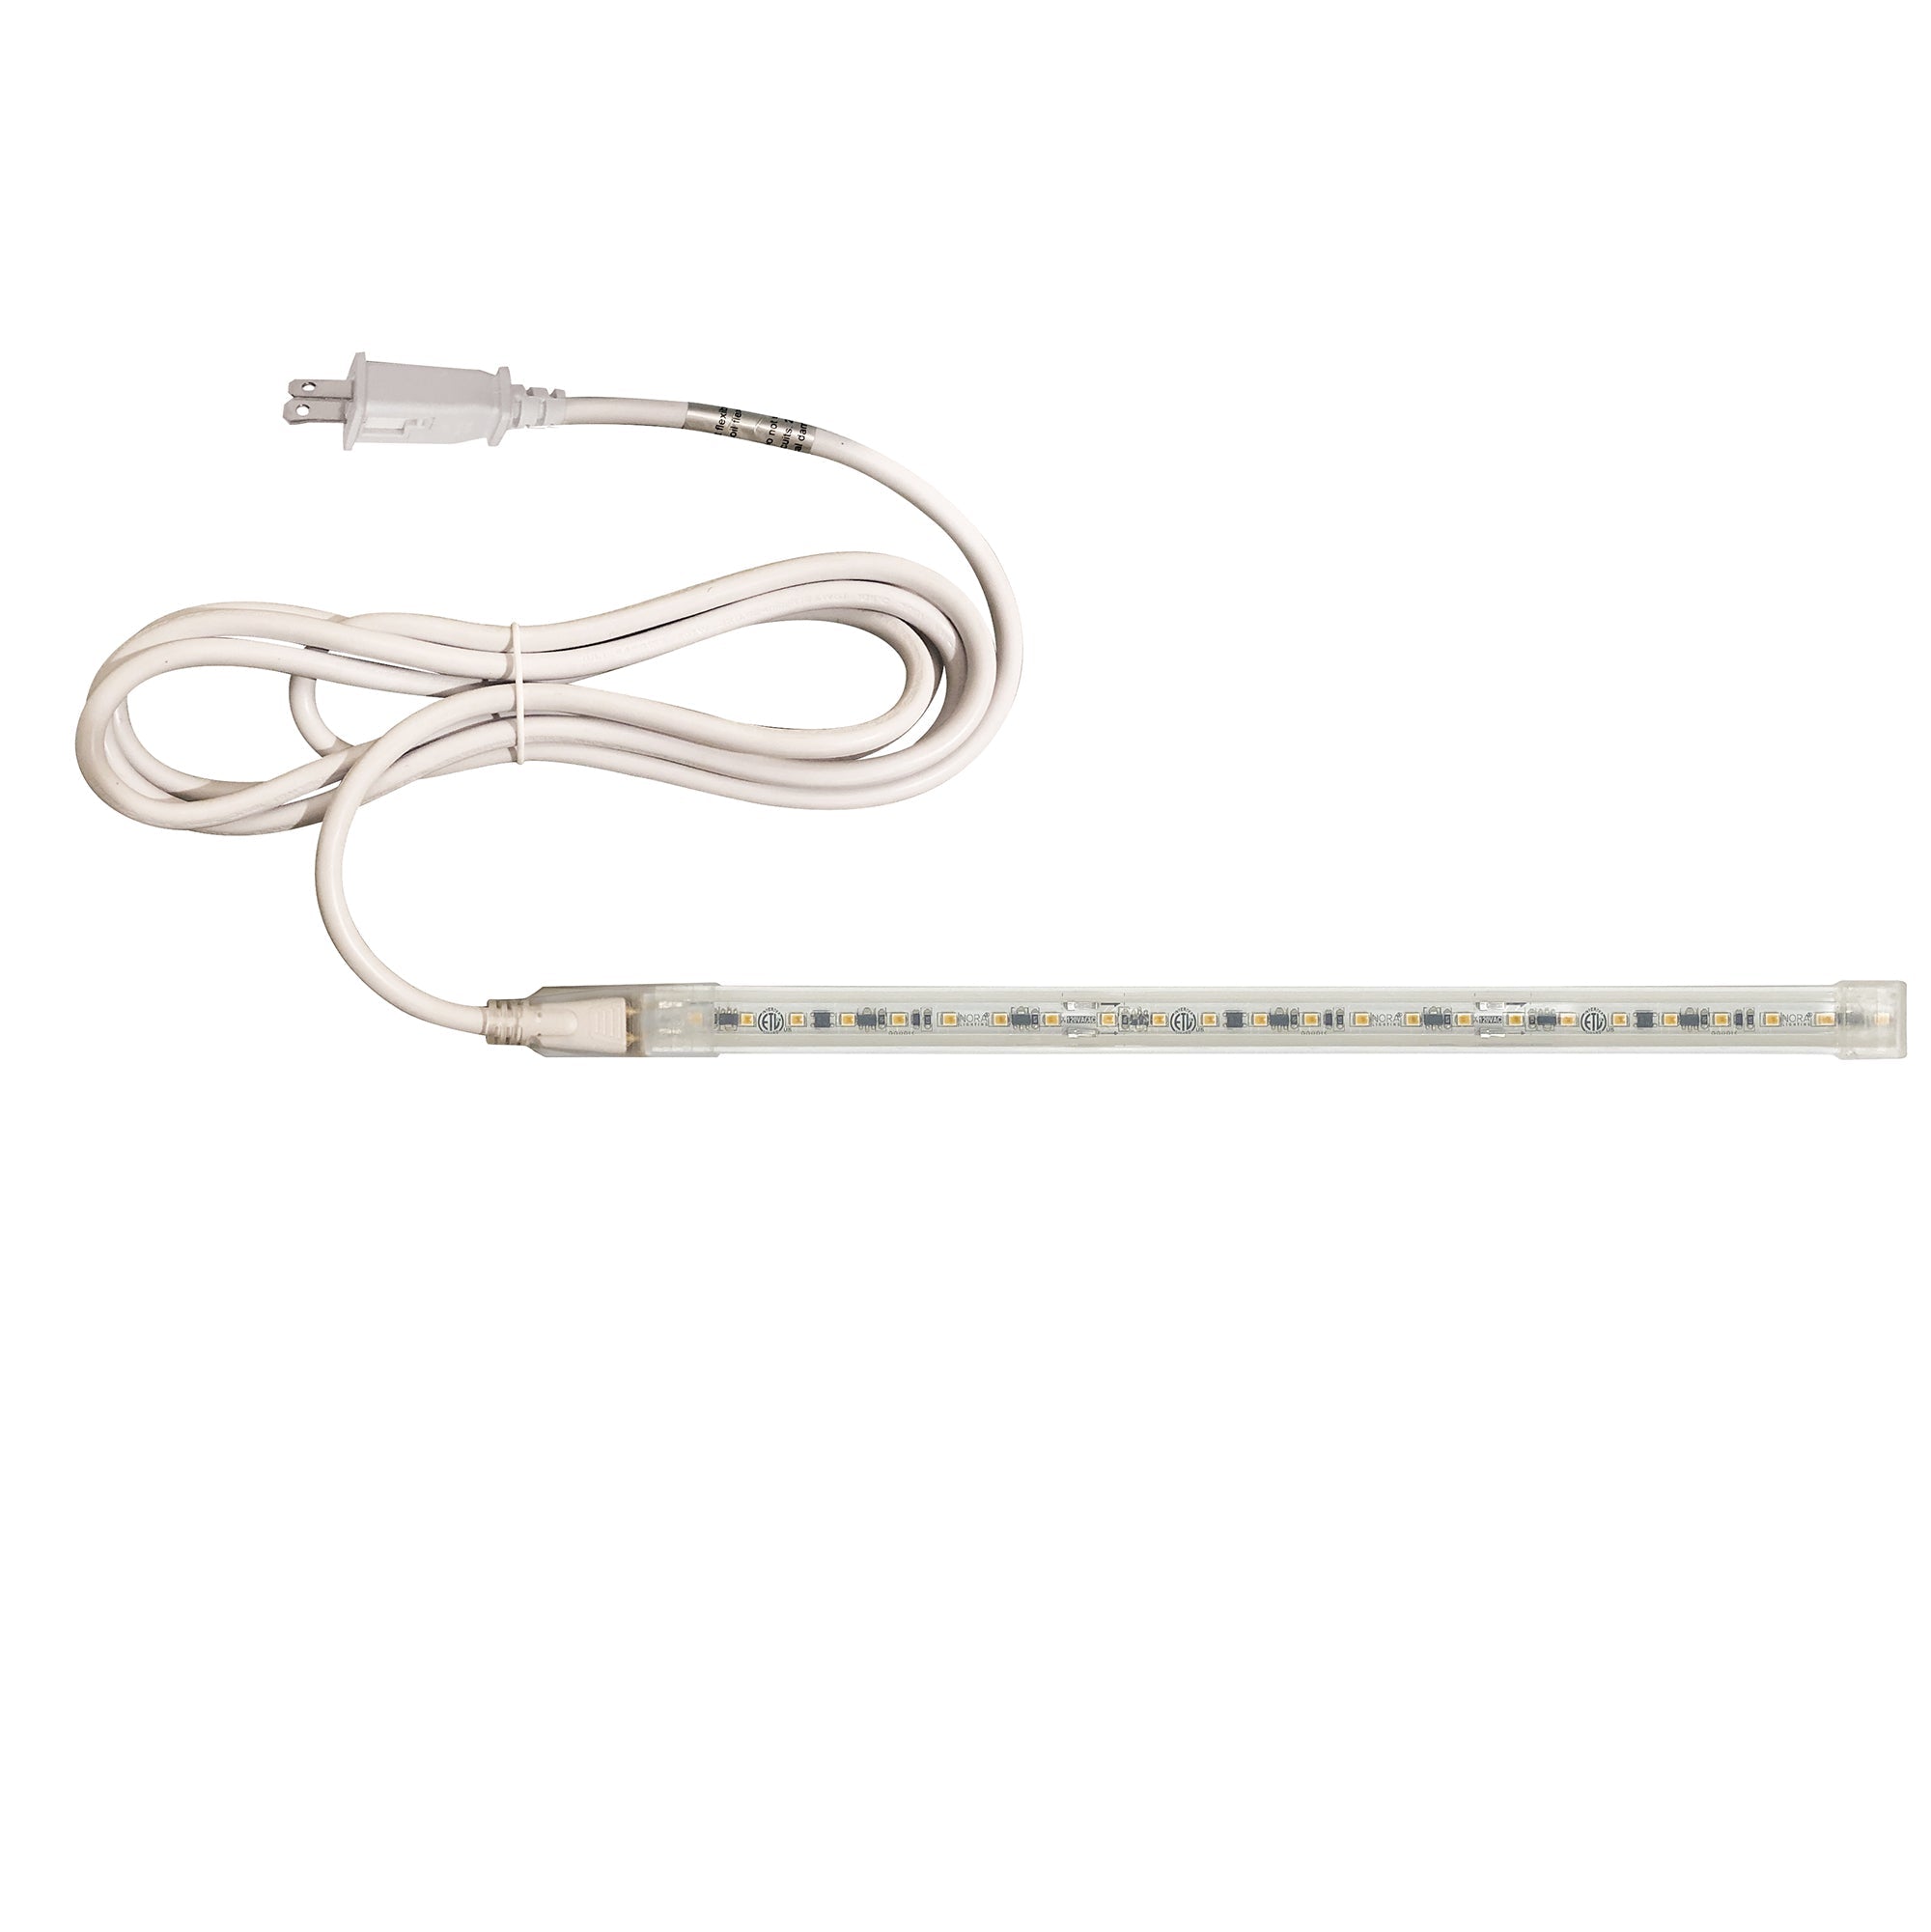 Nora Lighting NUTP13-W52-12-930/CP - Accent / Undercabinet - Custom Cut 52-ft 120V Continuous LED Tape Light, 330lm / 3.6W per foot, 3000K, w/ Mounting Clips and 8' Cord & Plug